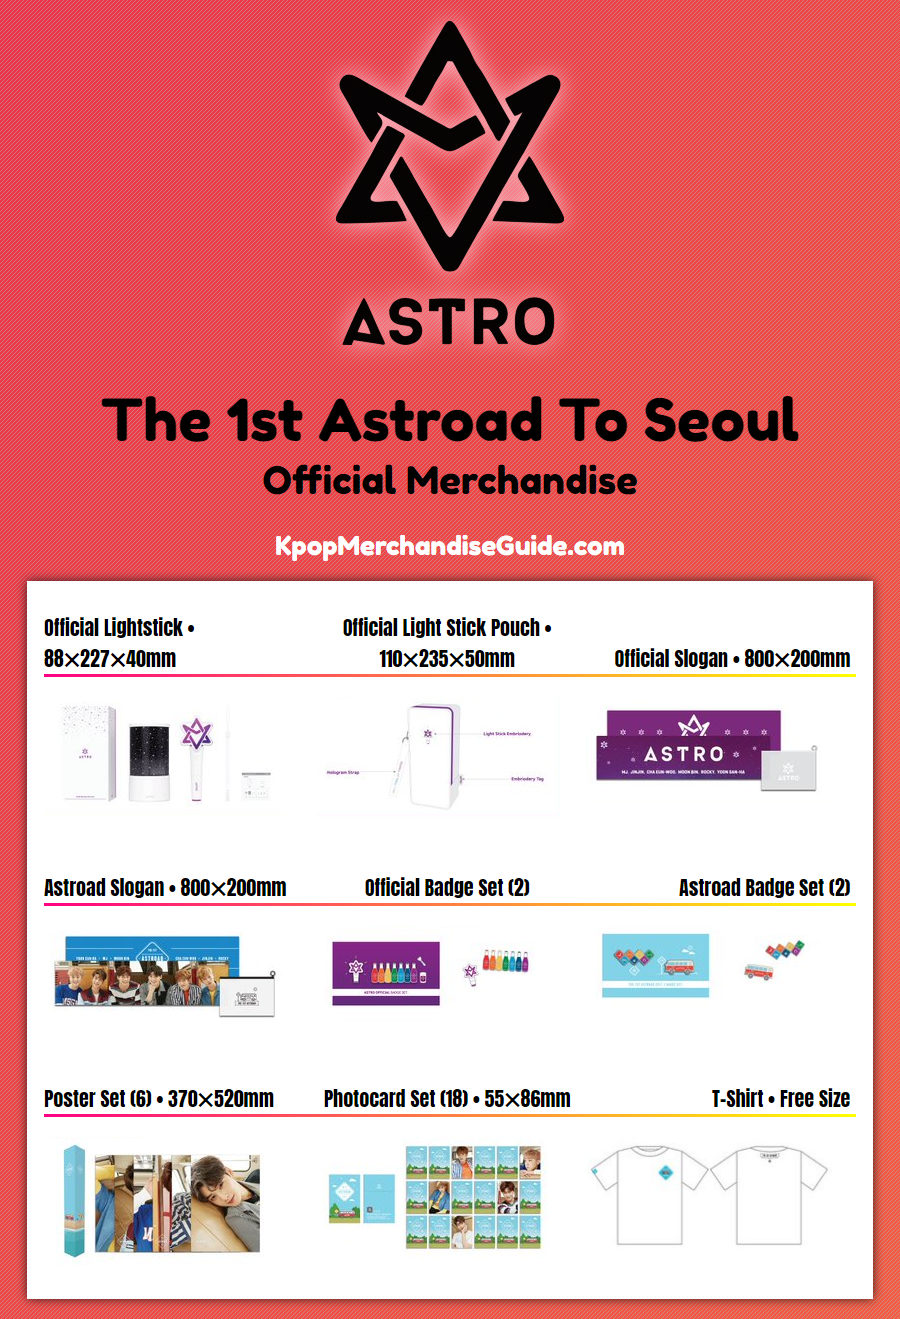 Astro The 1st Astroad To Seoul Concert Merchandise